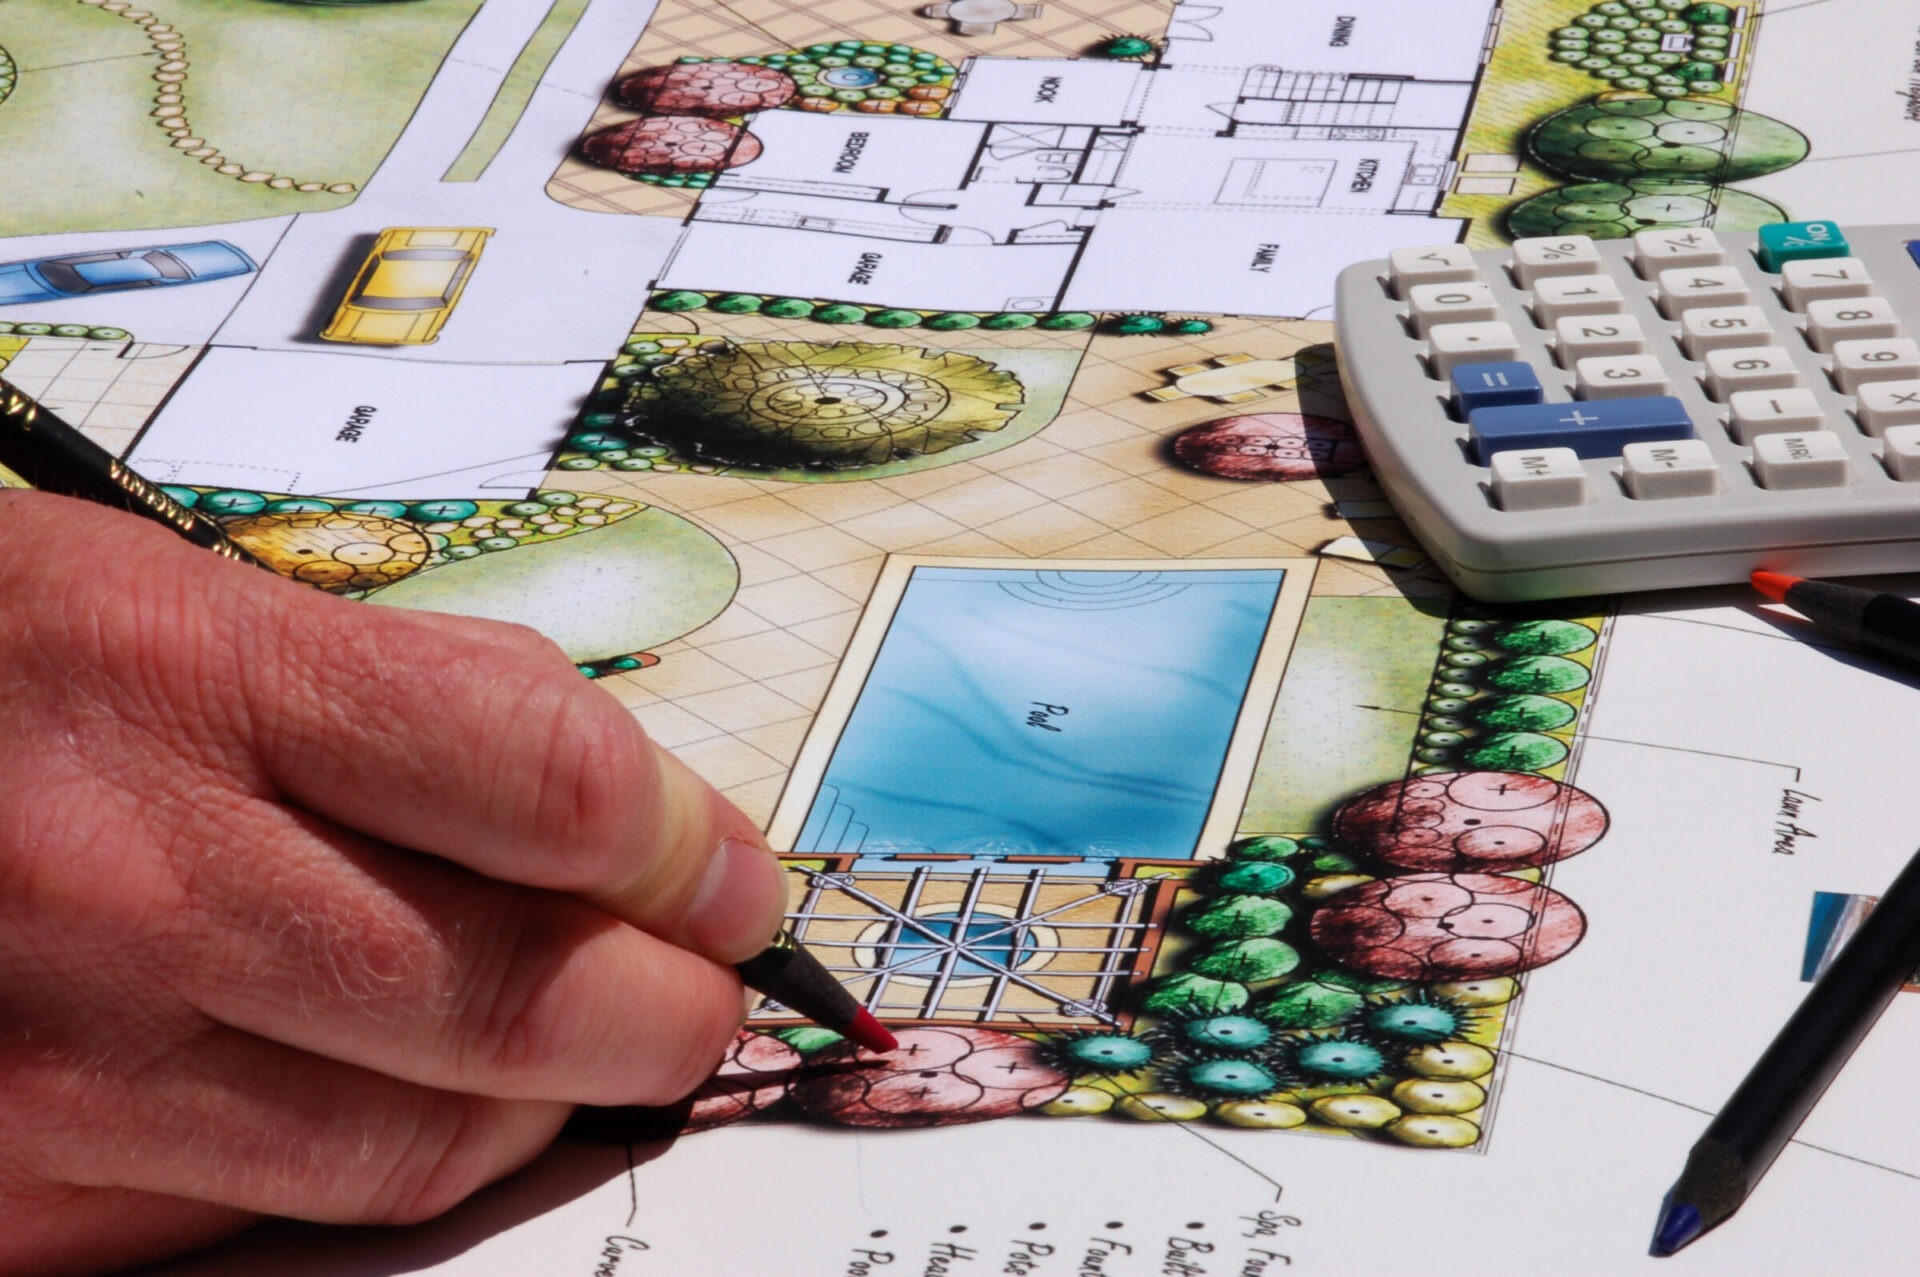 A person's hand holds a pencil over a colorful landscape architecture plan, featuring a pool, trees, and garden areas, alongside a calculator.